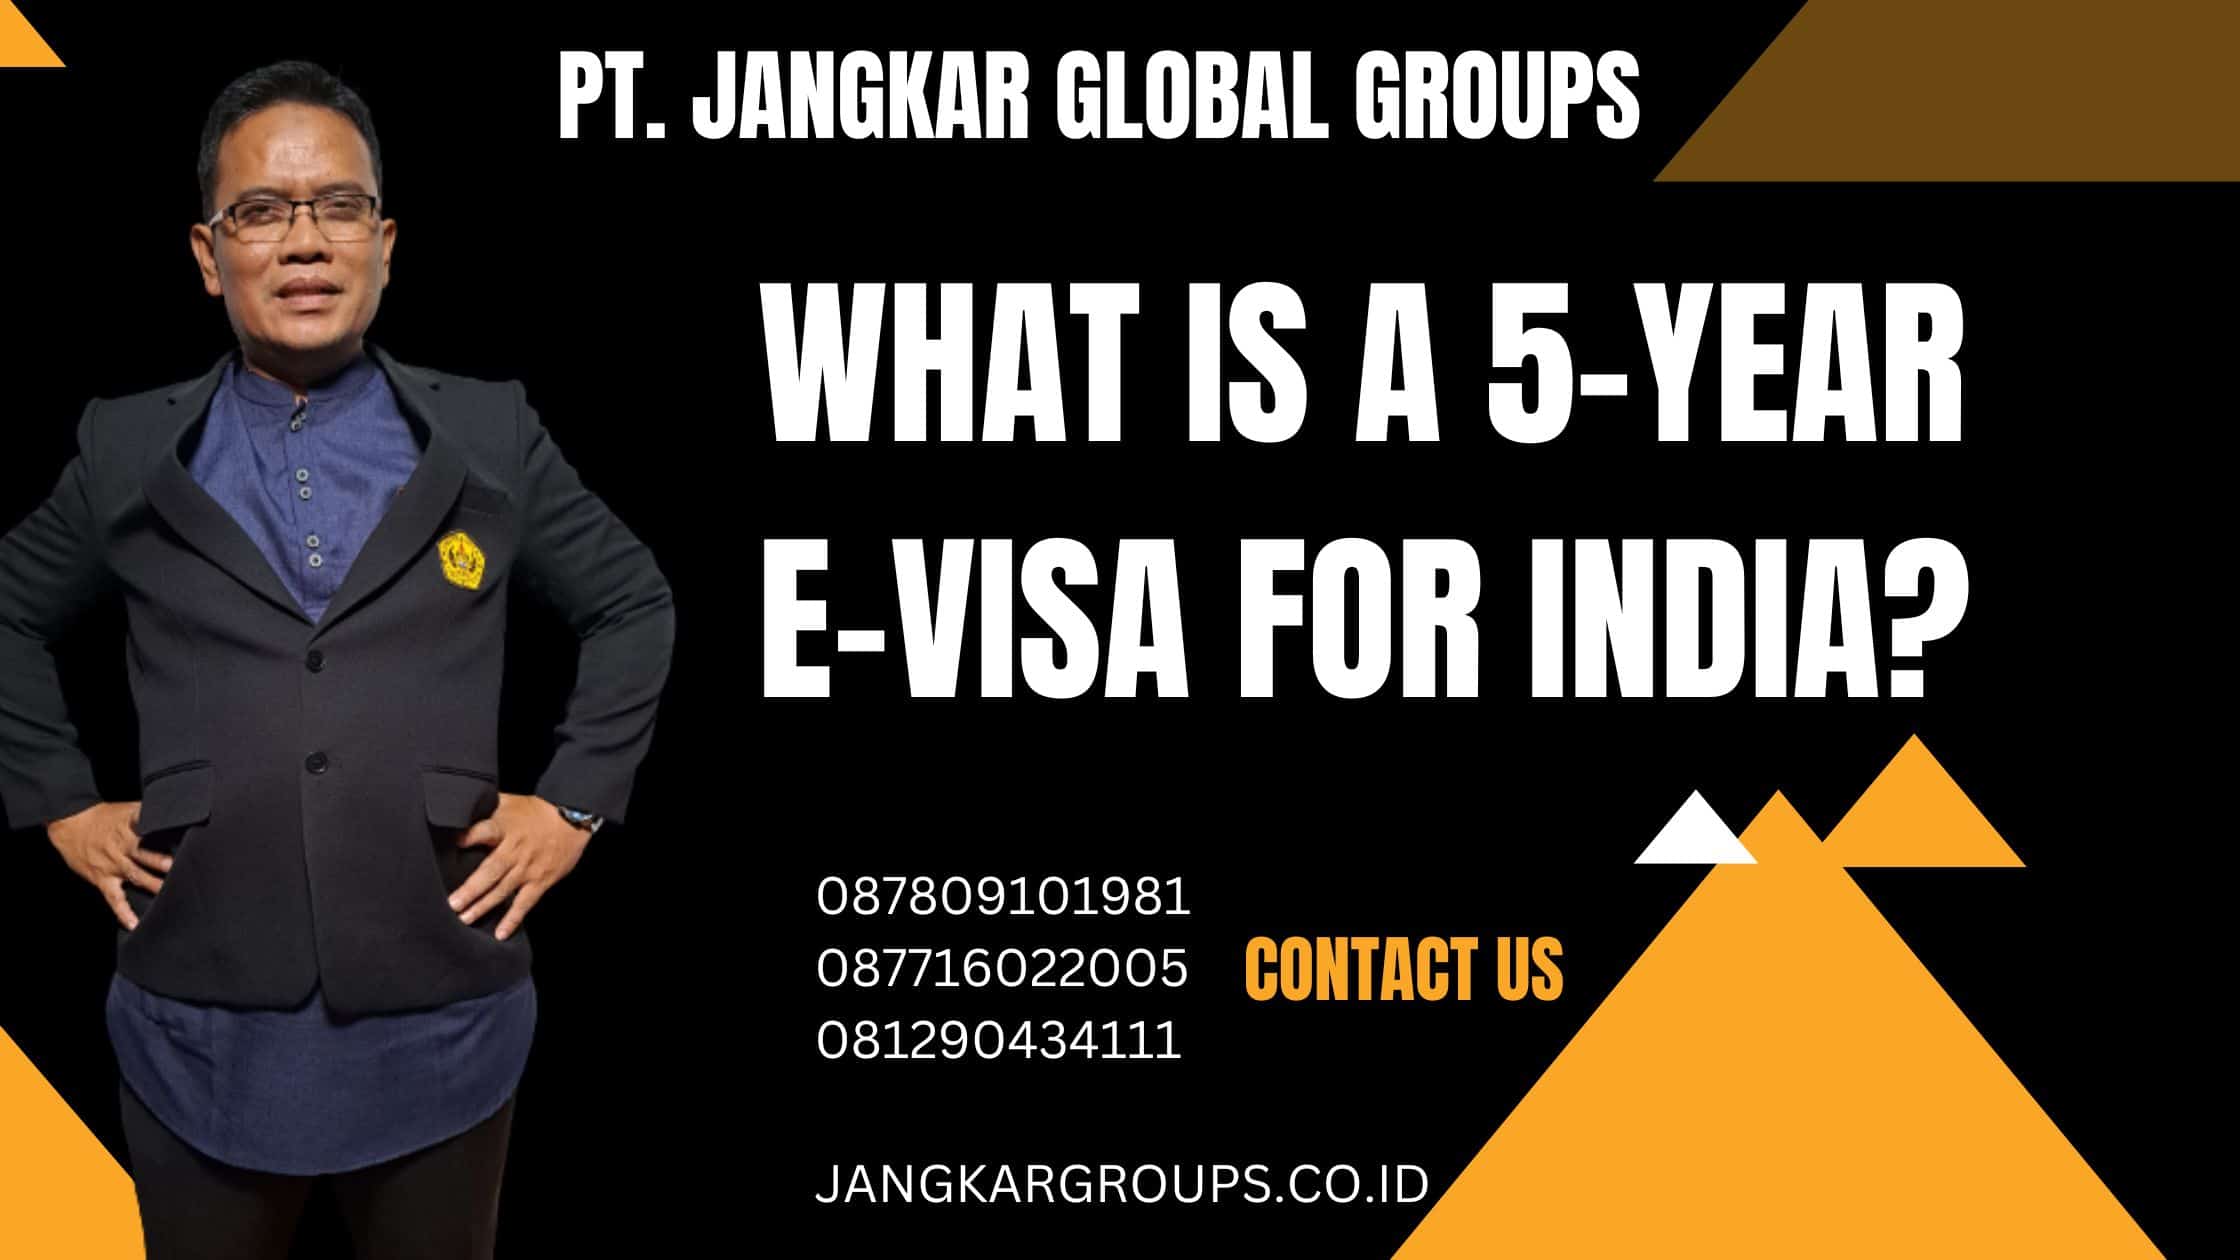 What is a 5-year e-visa for India?